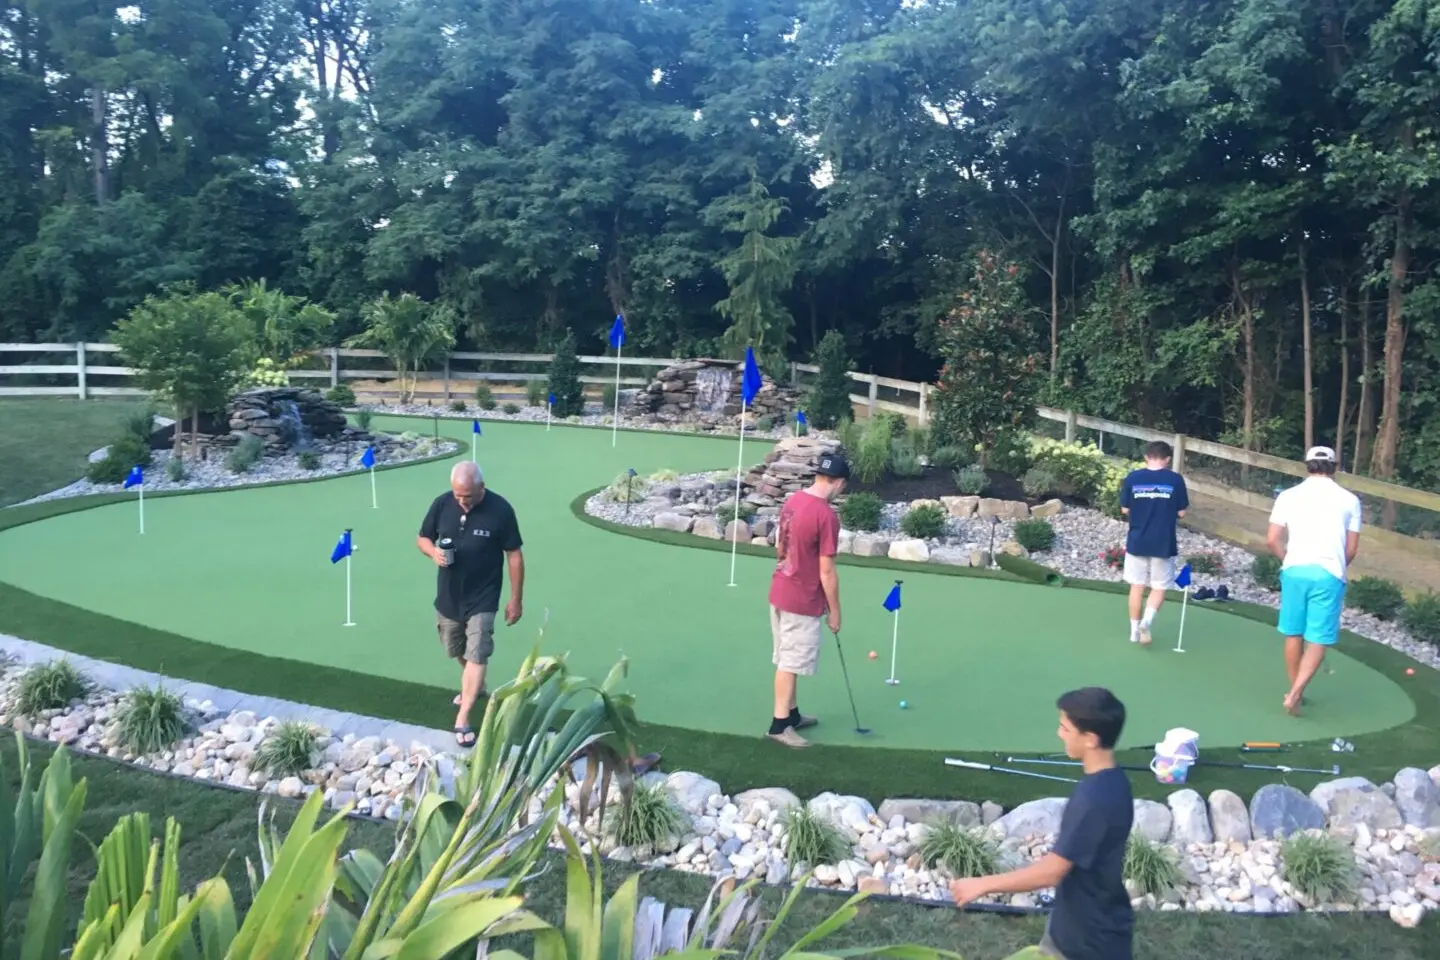 A group of people playing mini golf on the green.